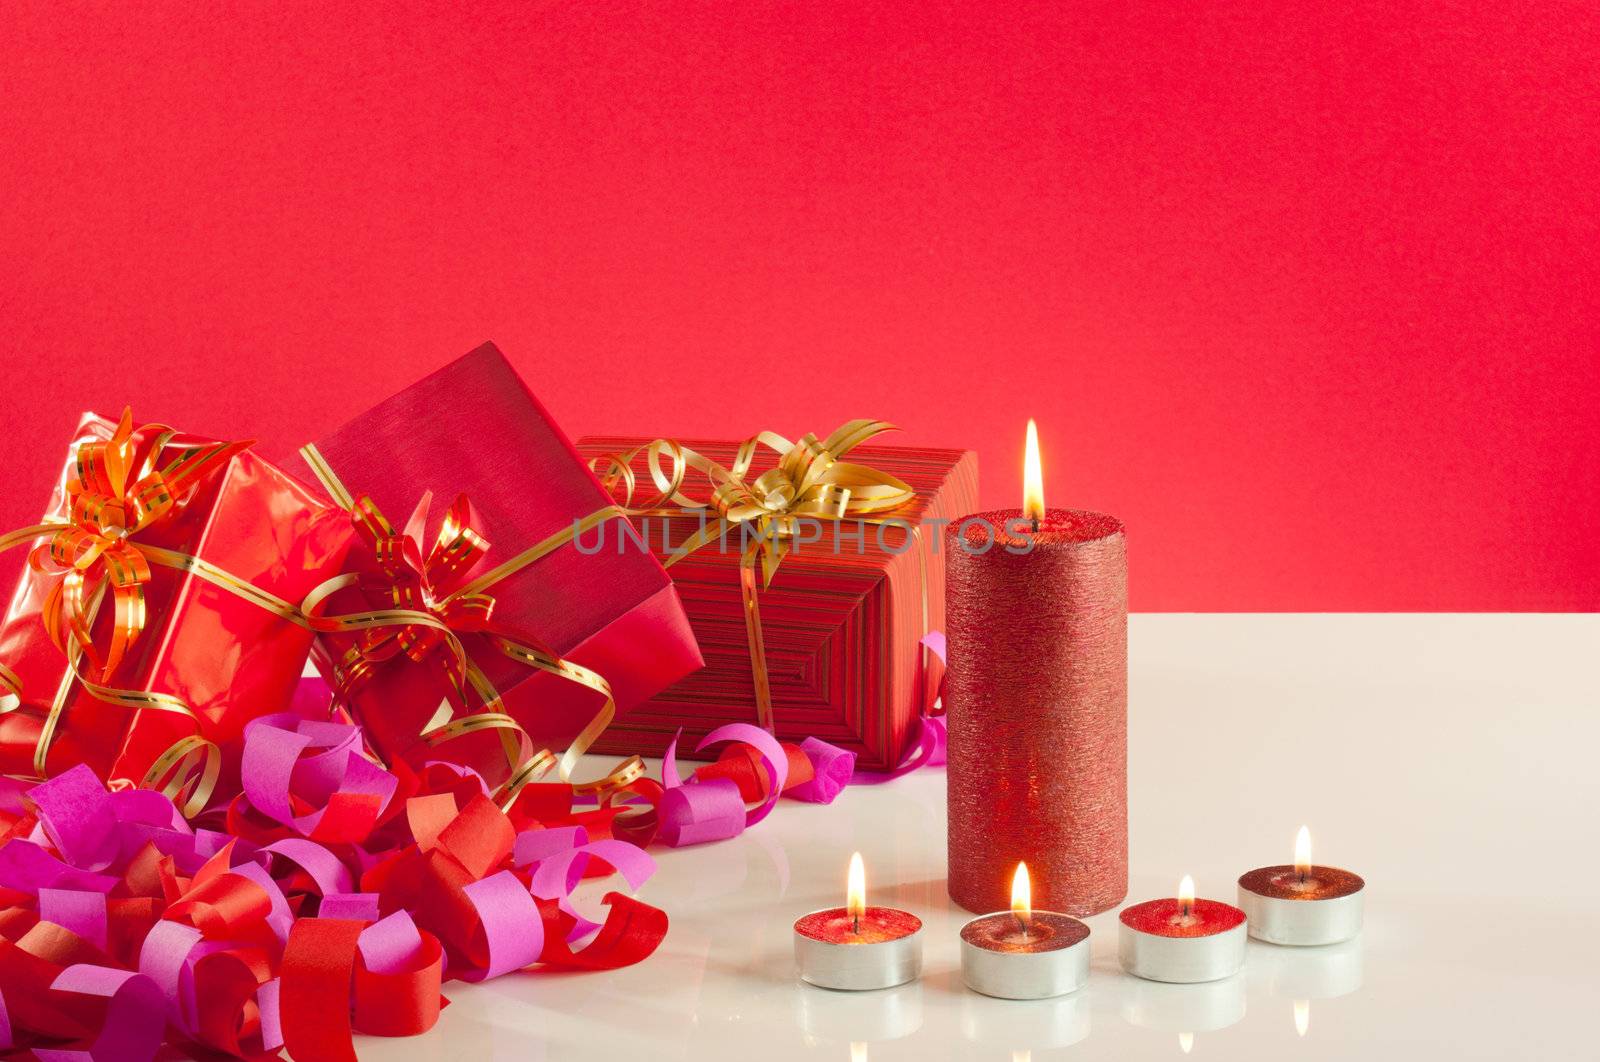 Christmas gifts and candles over red background